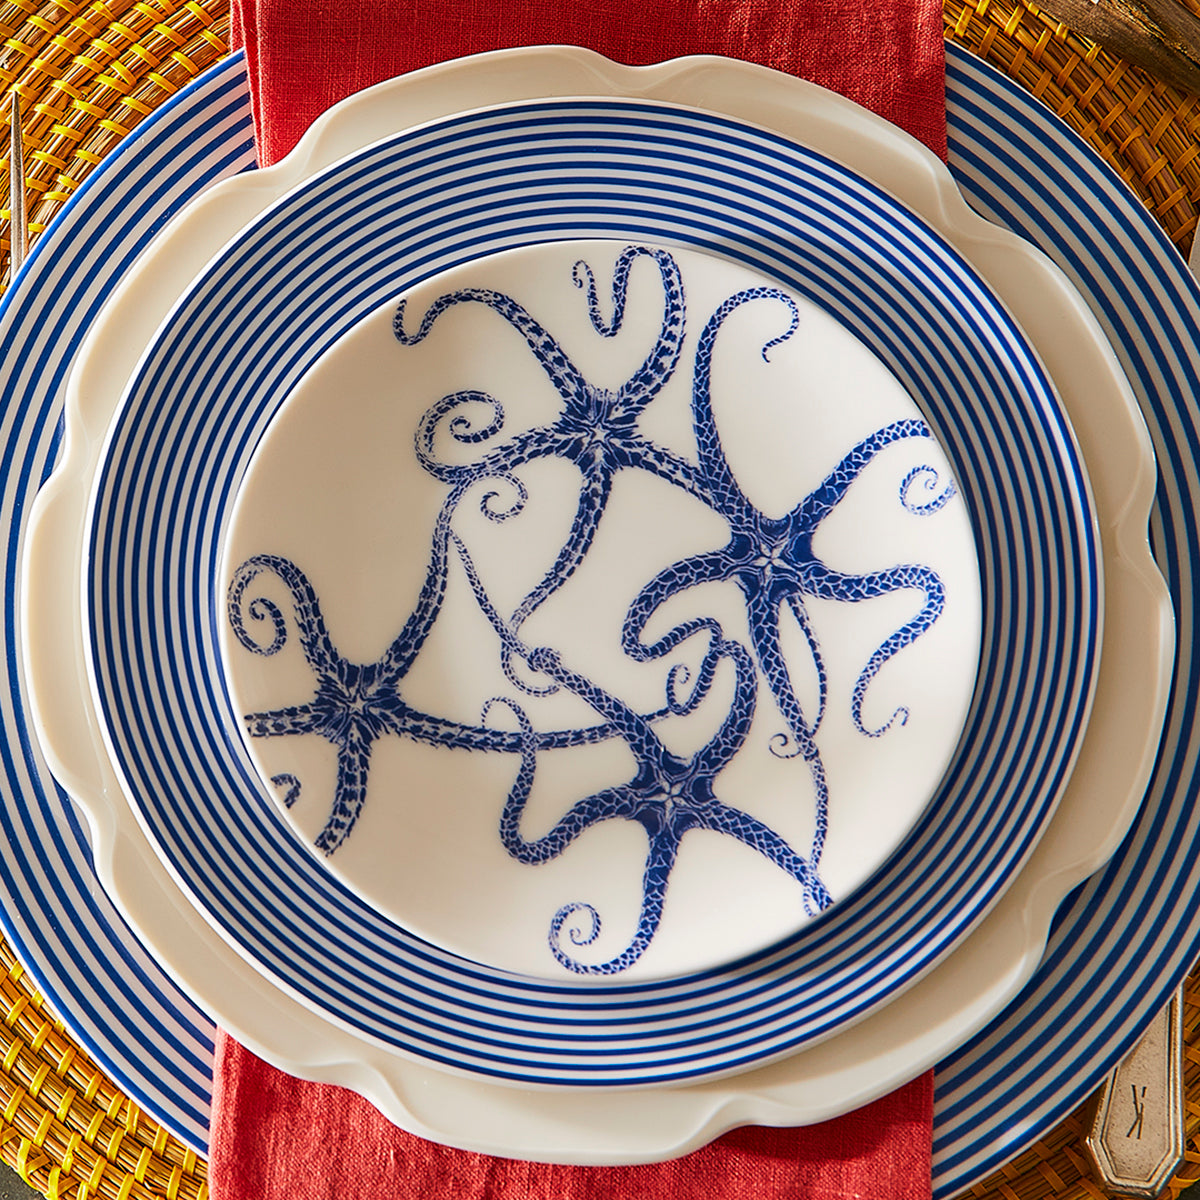 Here's a collection of our best-selling Coastal Dinnerware patterns in blue and white porcelain, with a few red and white accents, for mixing and matching your tablescape from Caskata.